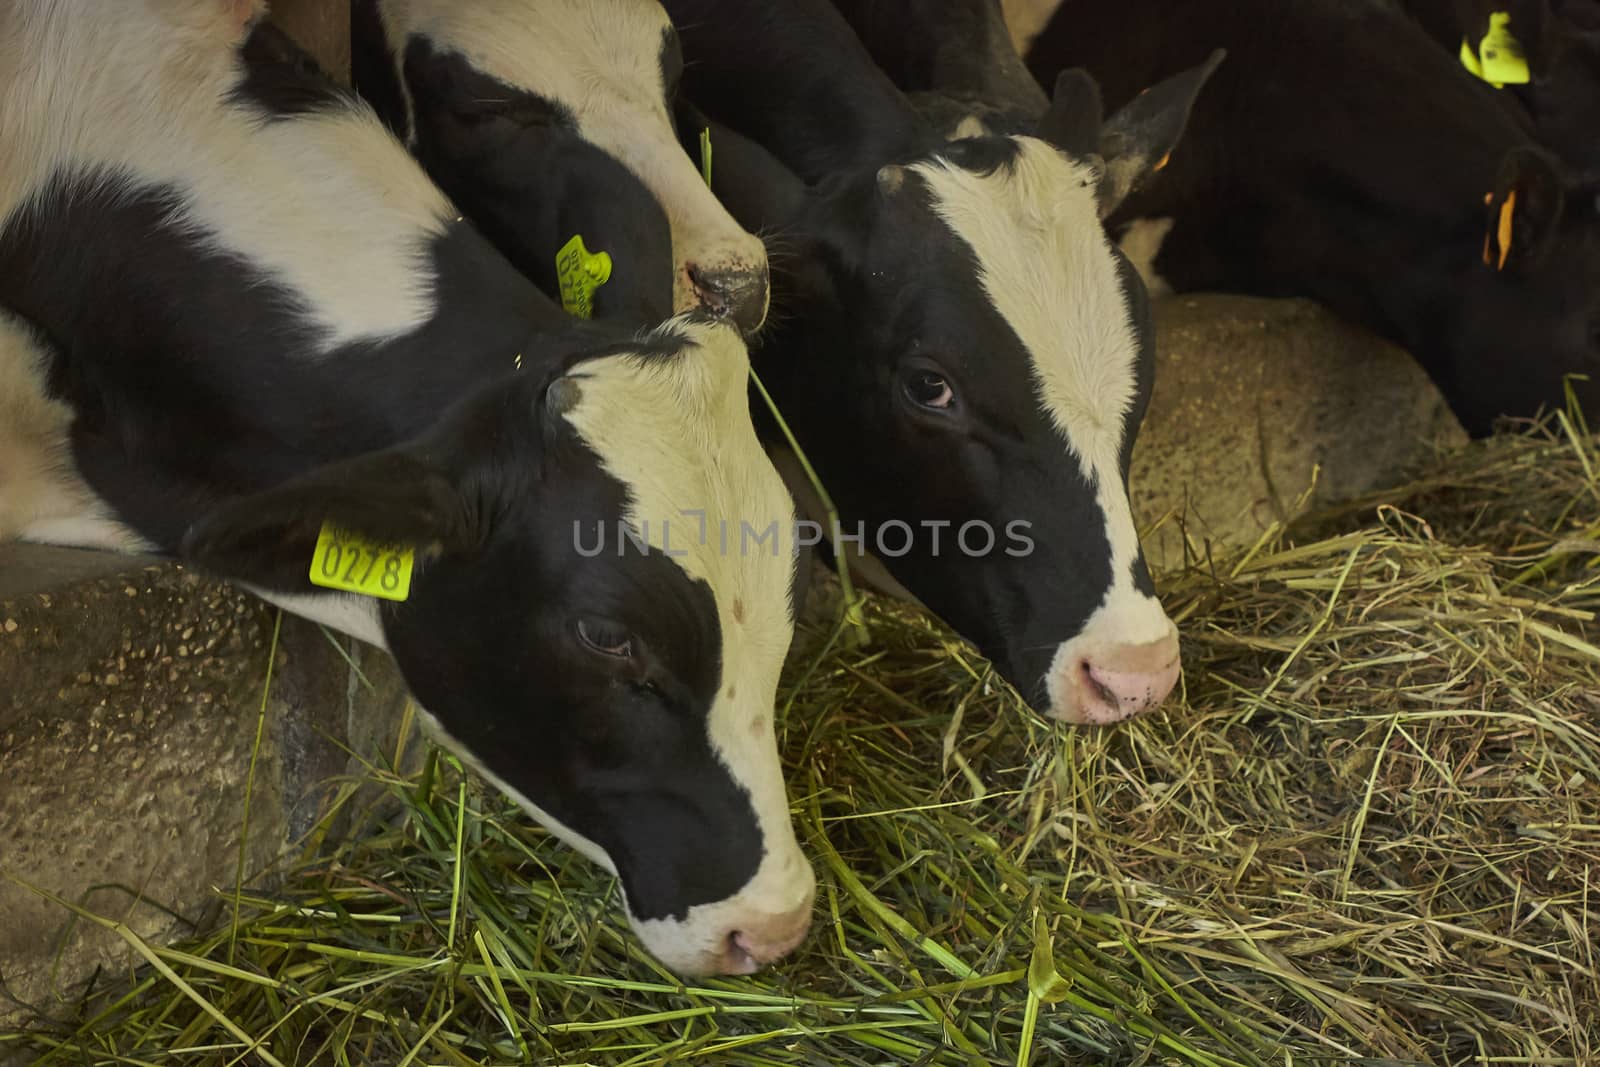 Cows on the farm 4 by pippocarlot